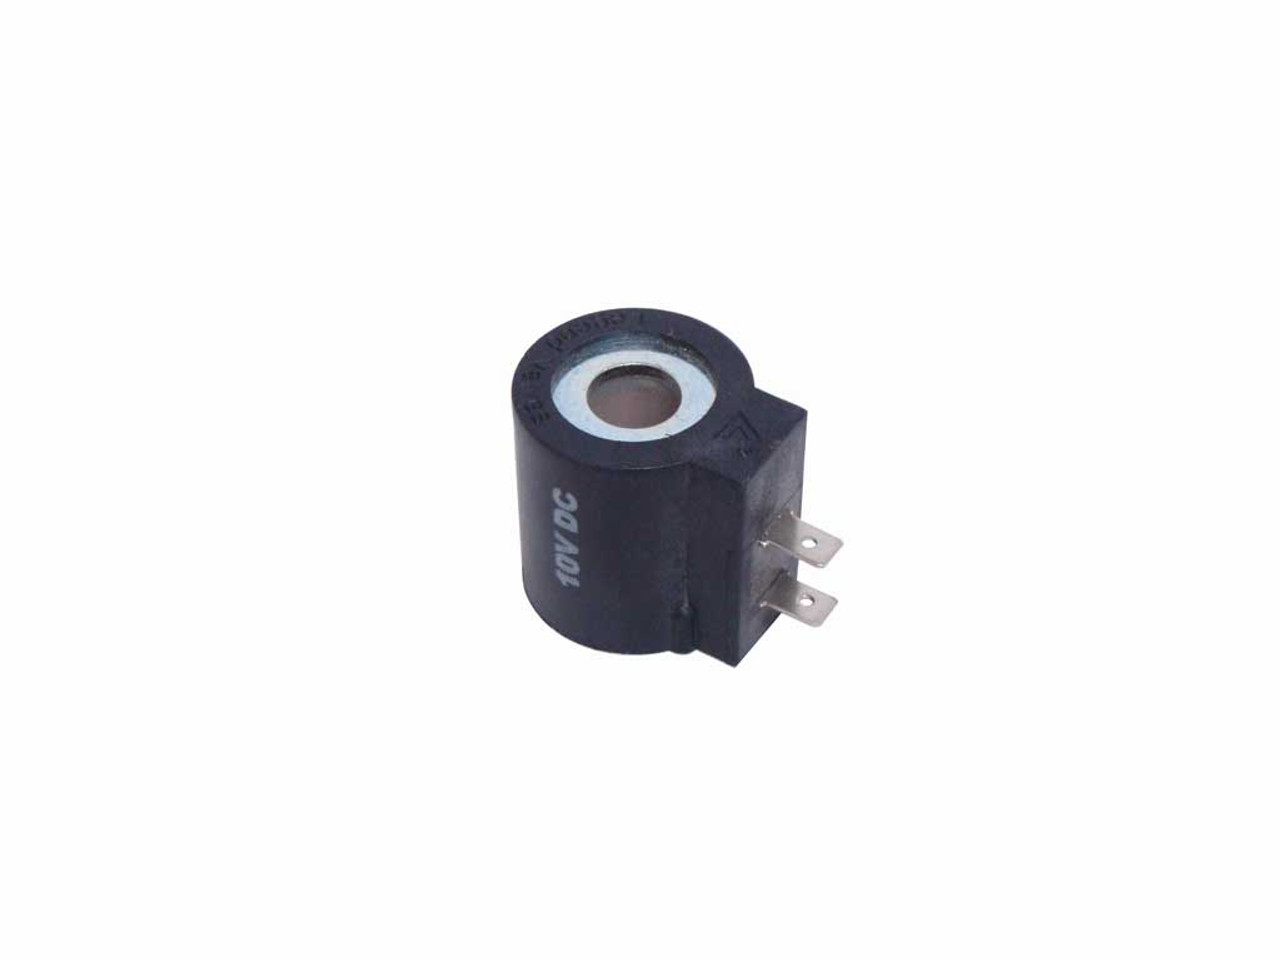 KTI 10 Volt Coil for use on  Power Up Valve on Hydraulic Pumps